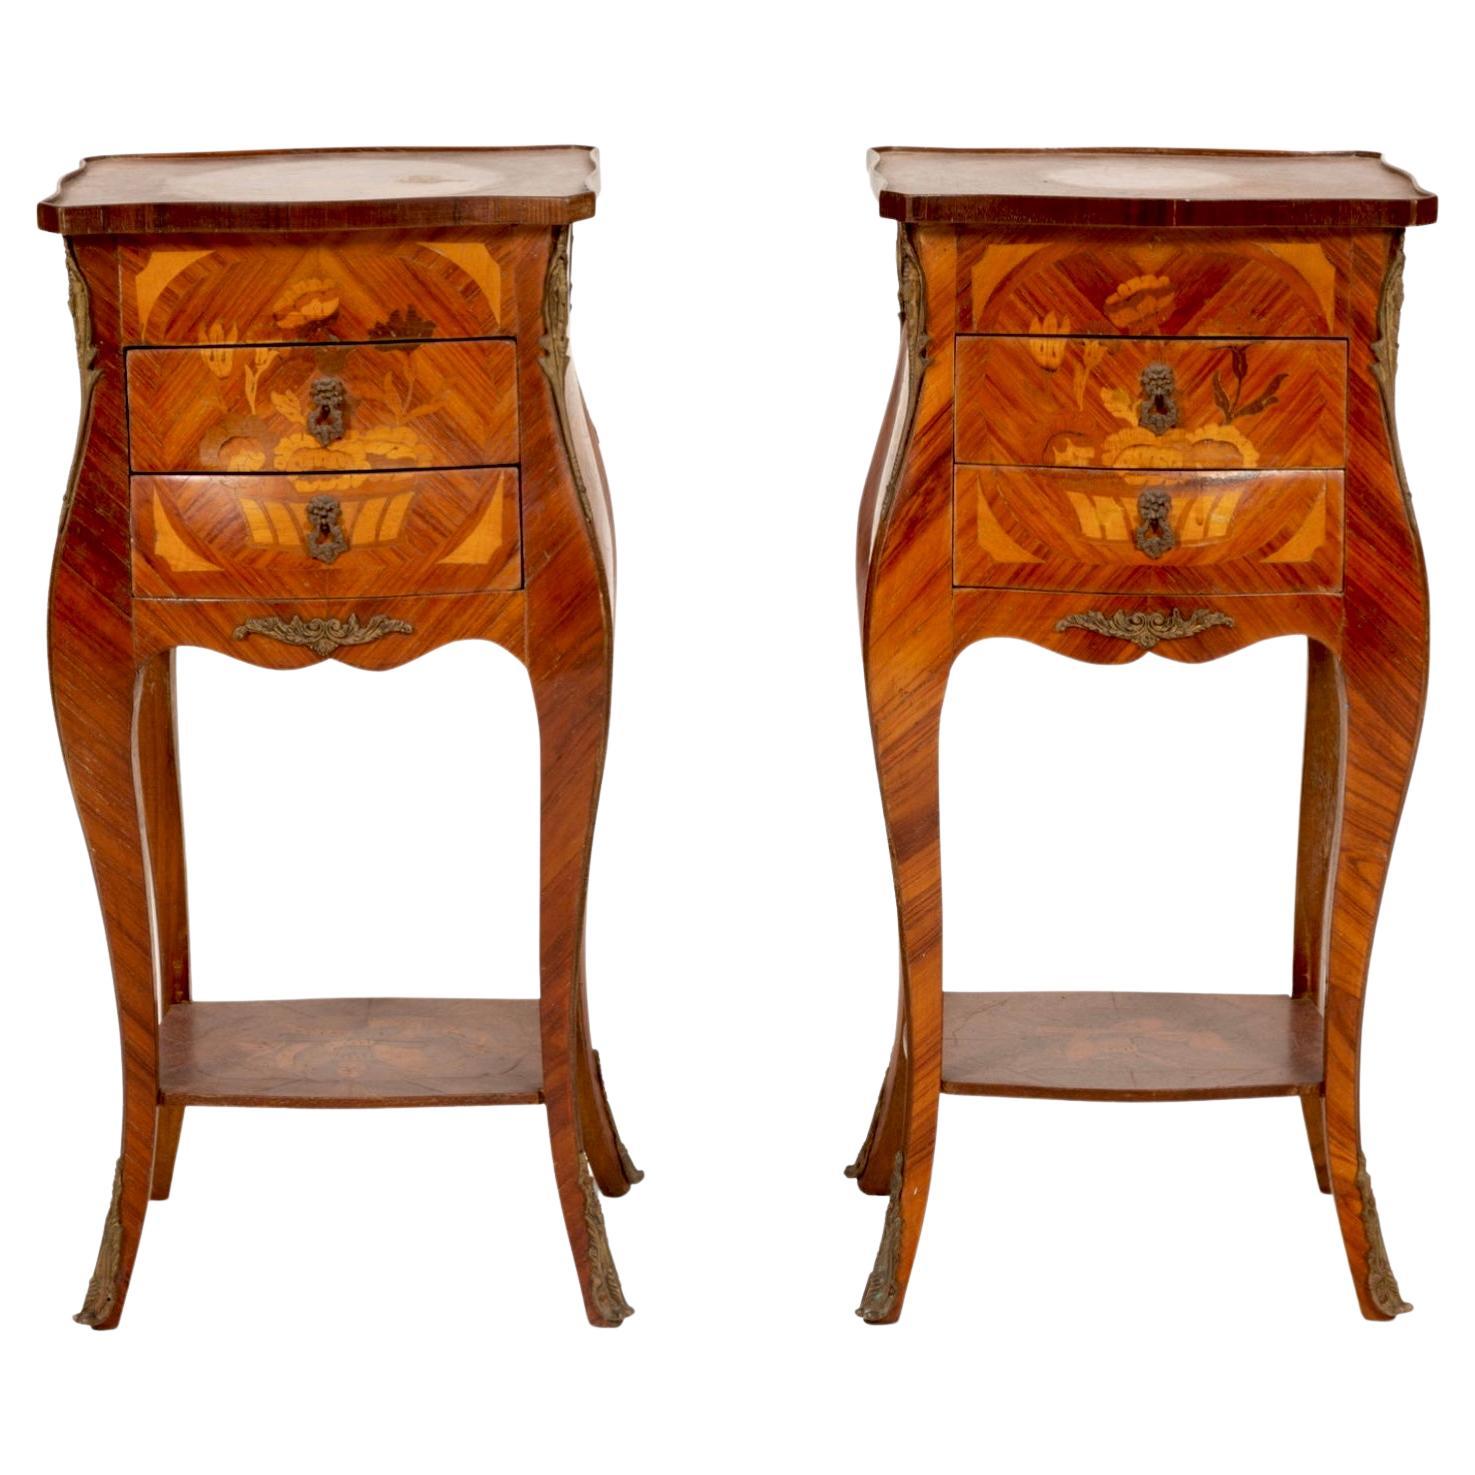 Pair of Marquetry Side Tables with Gilt Metal Mounts